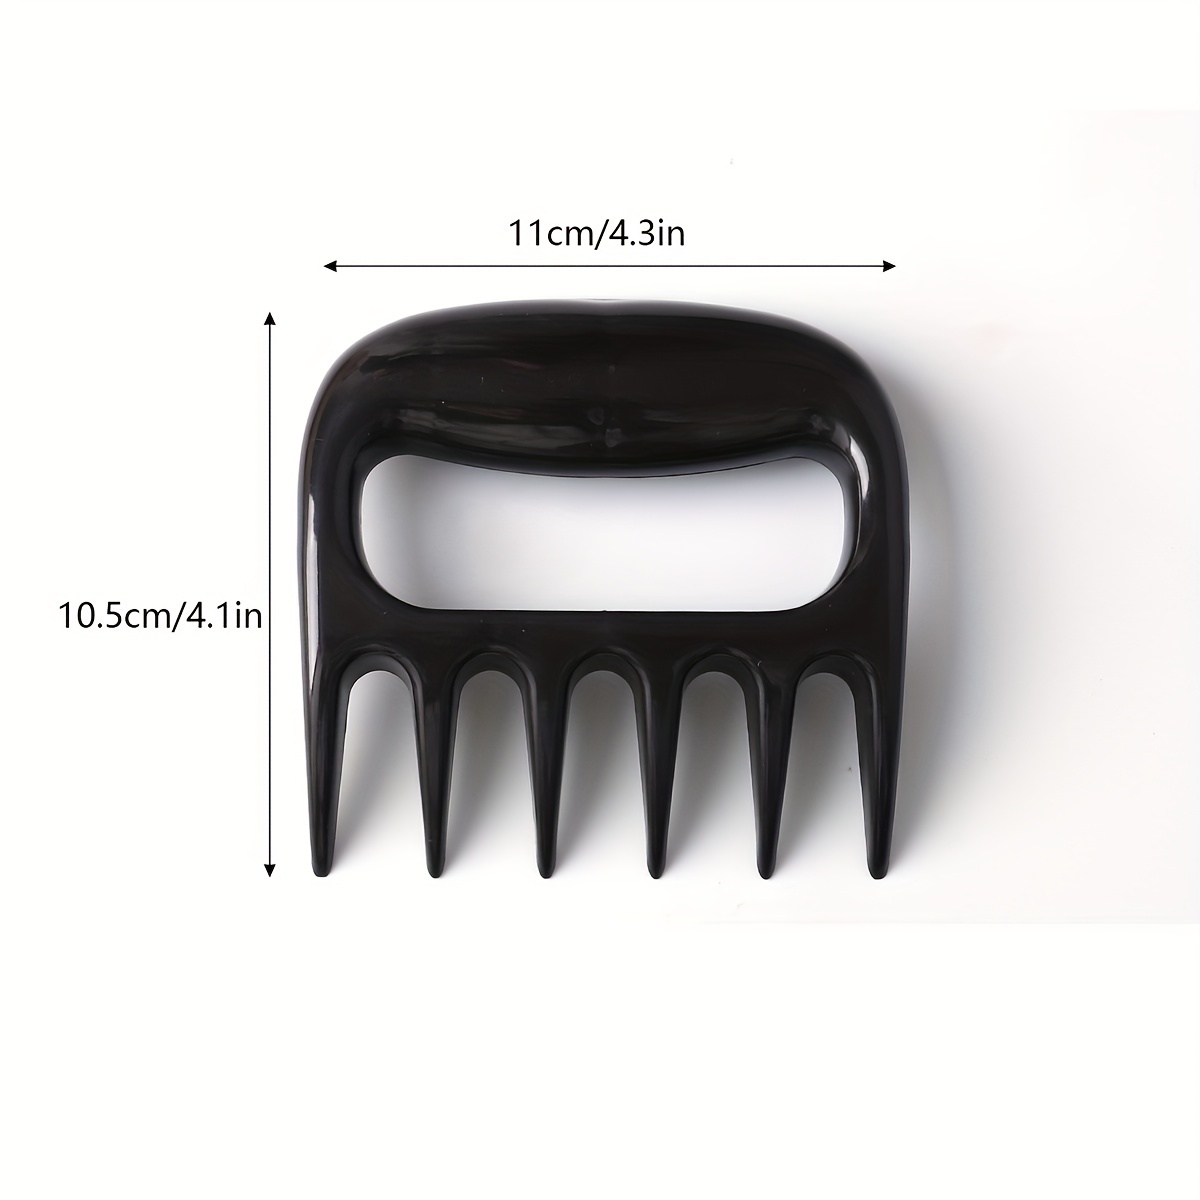 2pc Original Shredder Barbecue Claws, Easily Lift, Handle, Shred, And Cut  Meats Ultra-Sharp Blades And Heat Resistant, Grilling & Barbecue Utensils